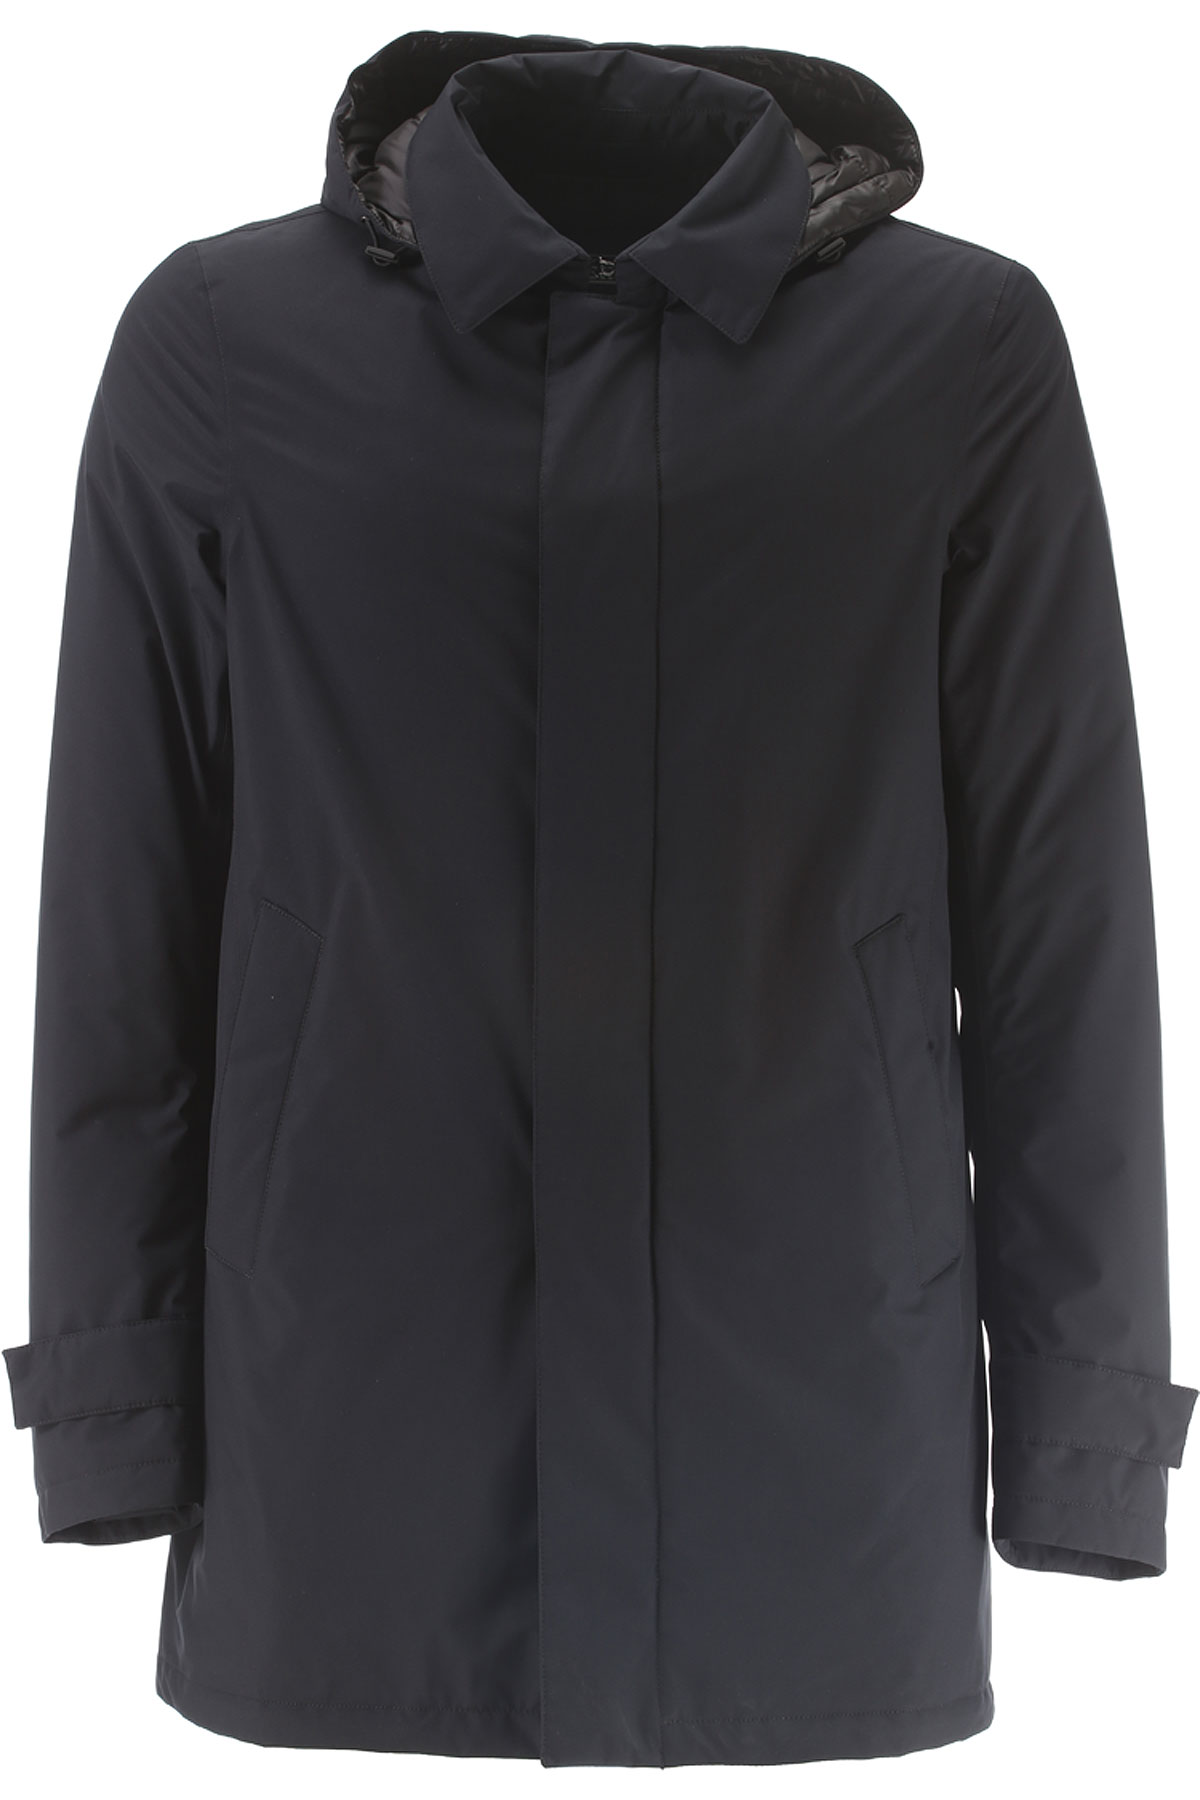 Herno Manteau Homme Outlet, Noir, Polyester, 2017, XL XXL